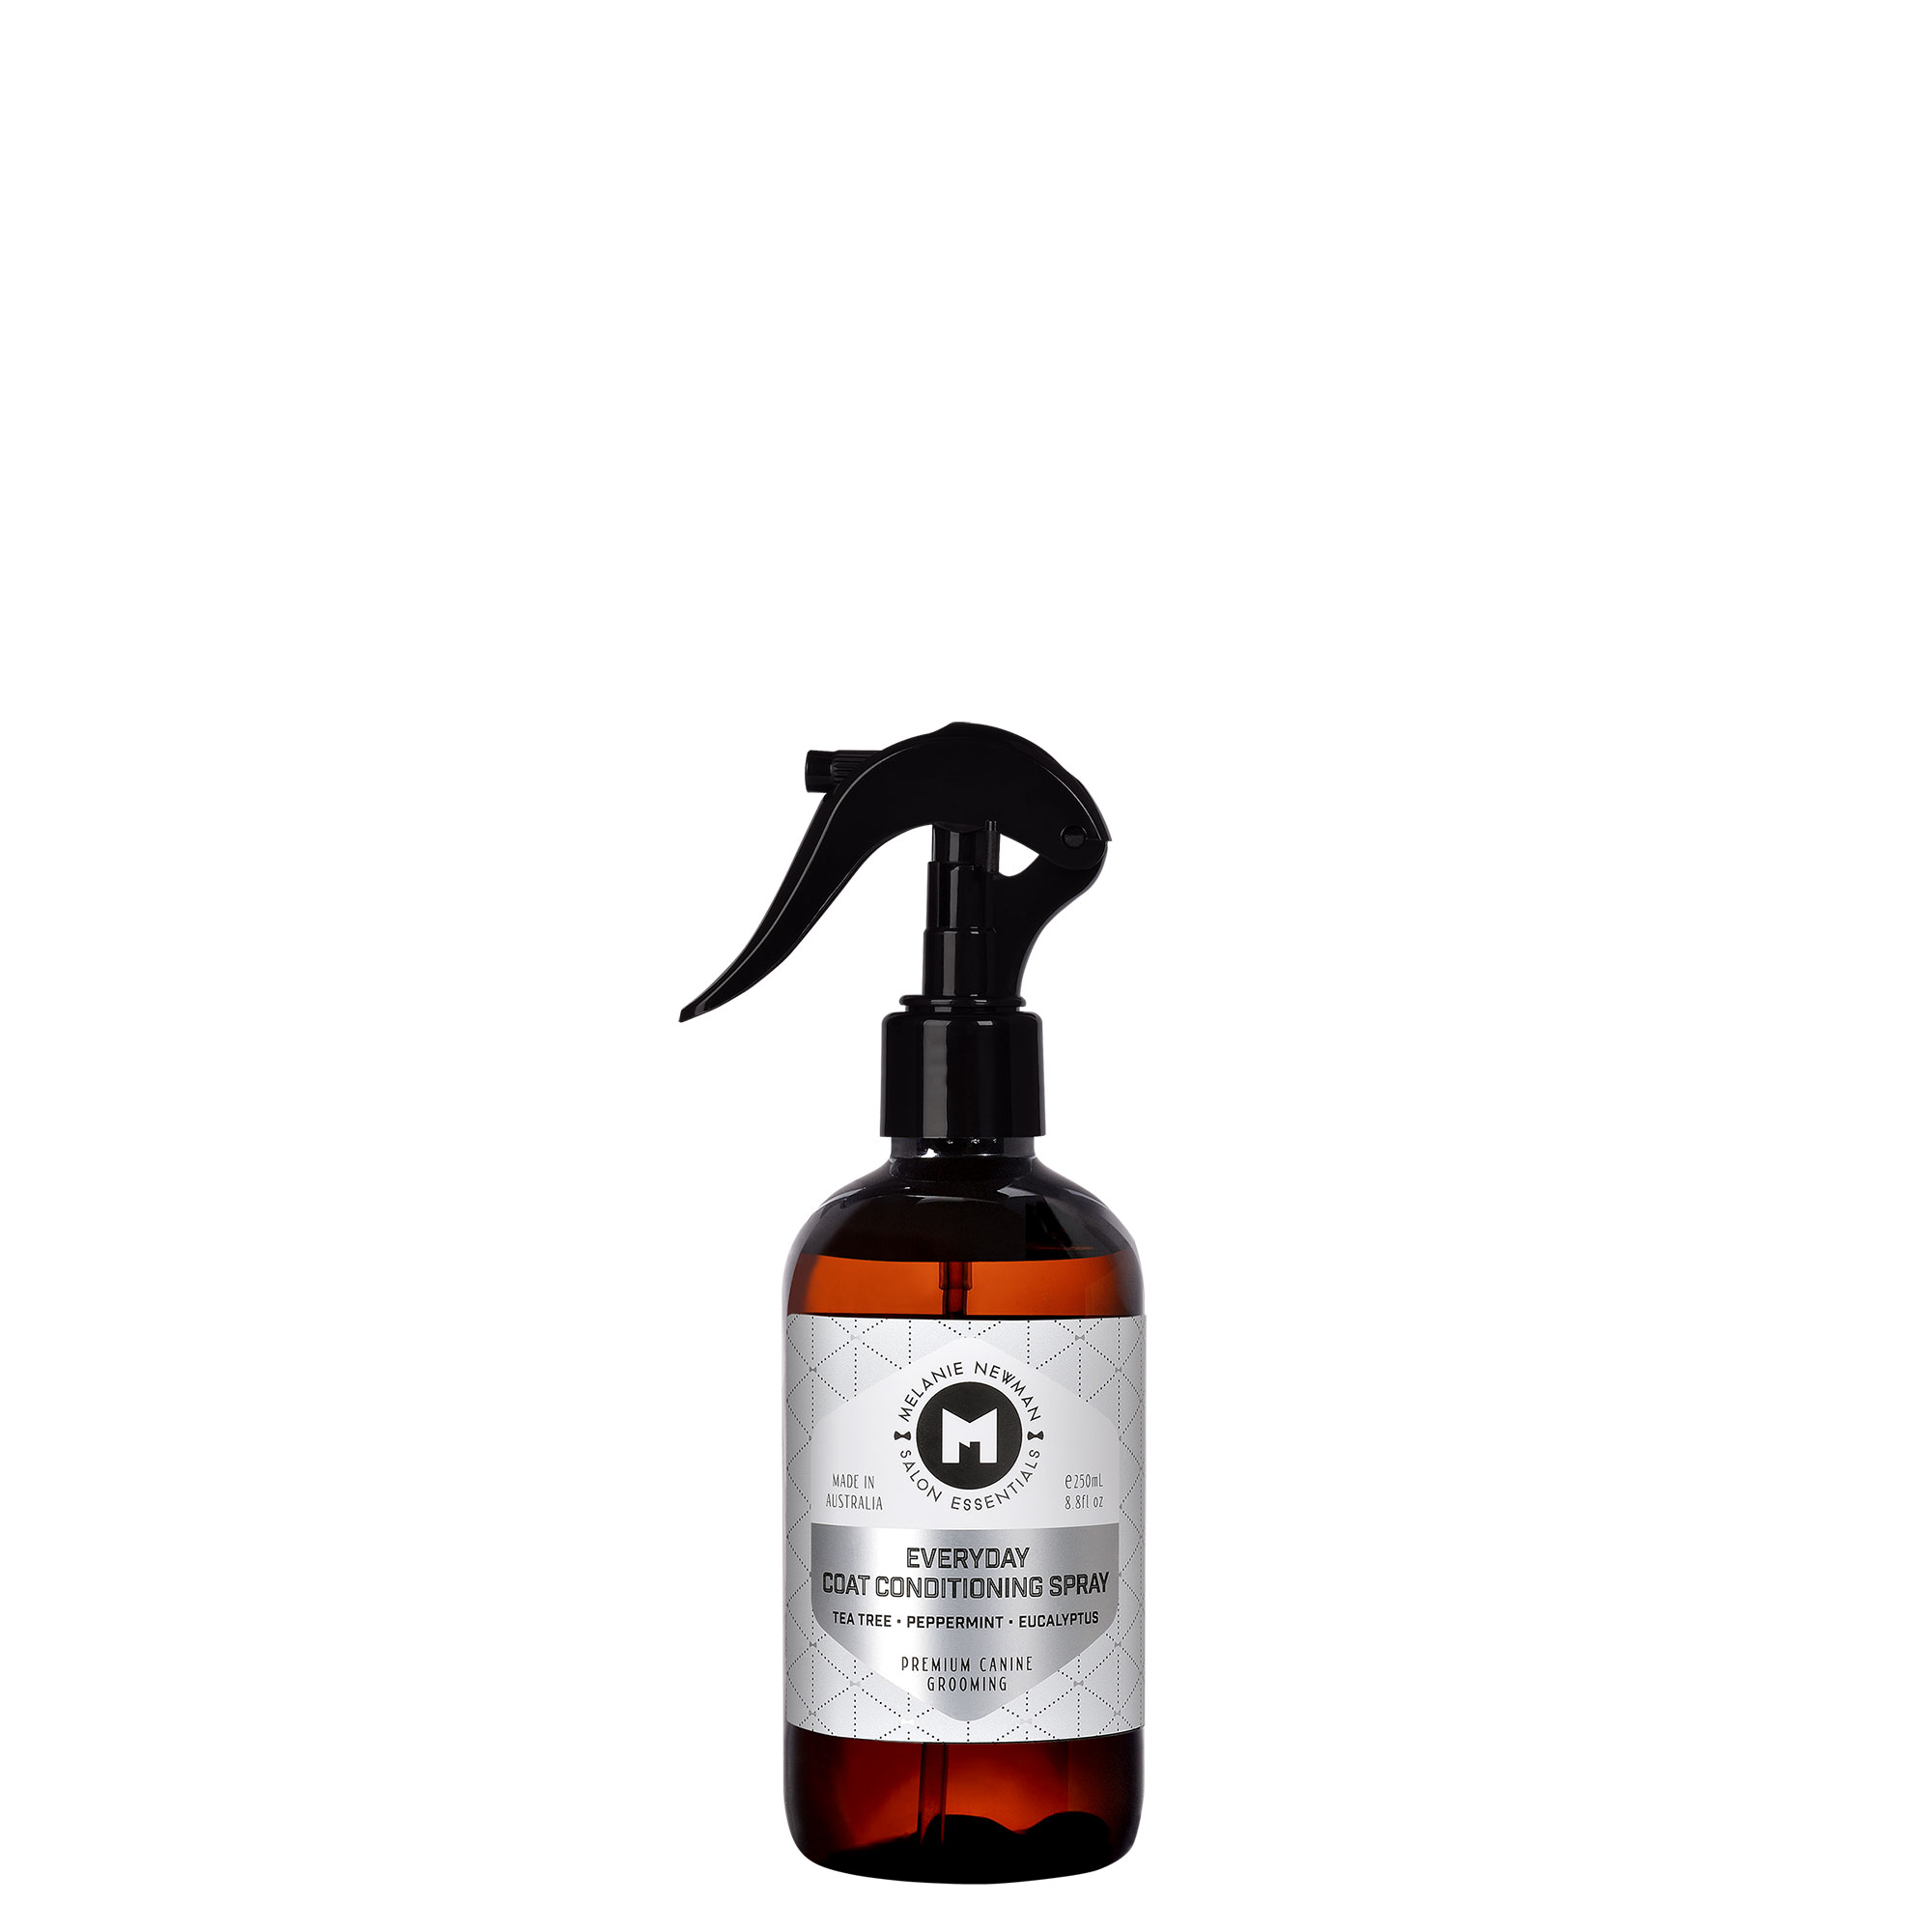 melanie newman everyday conditioning spray 250ml for dog grooming